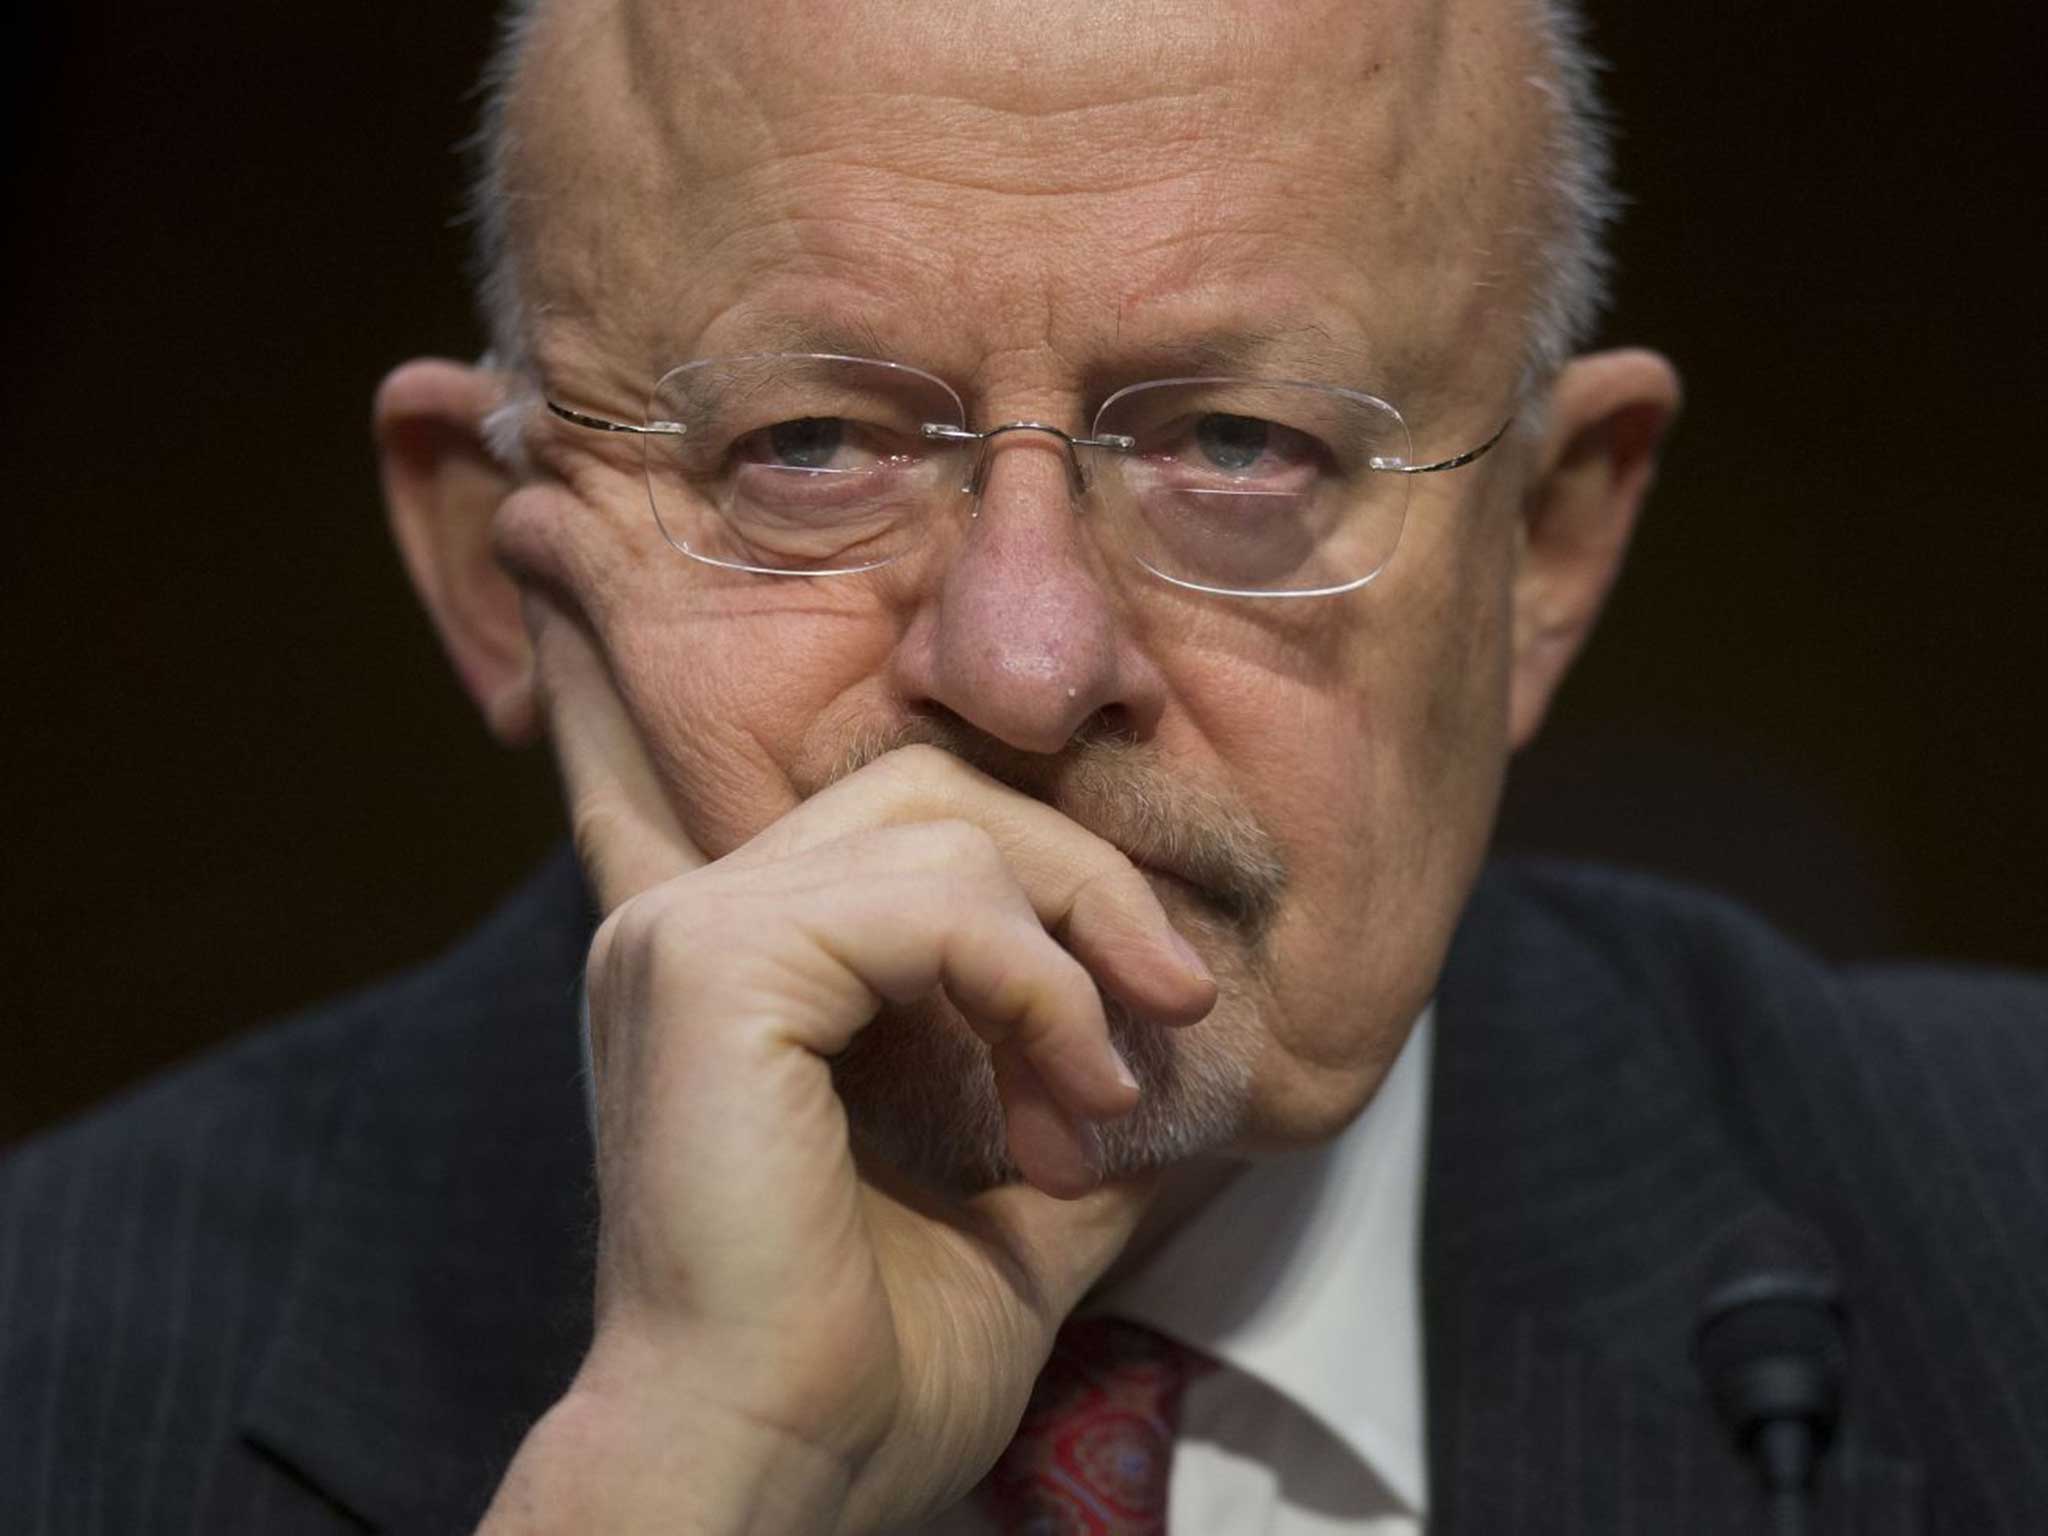 James Clapper said home devices will mean that surveillance capabilities are increased